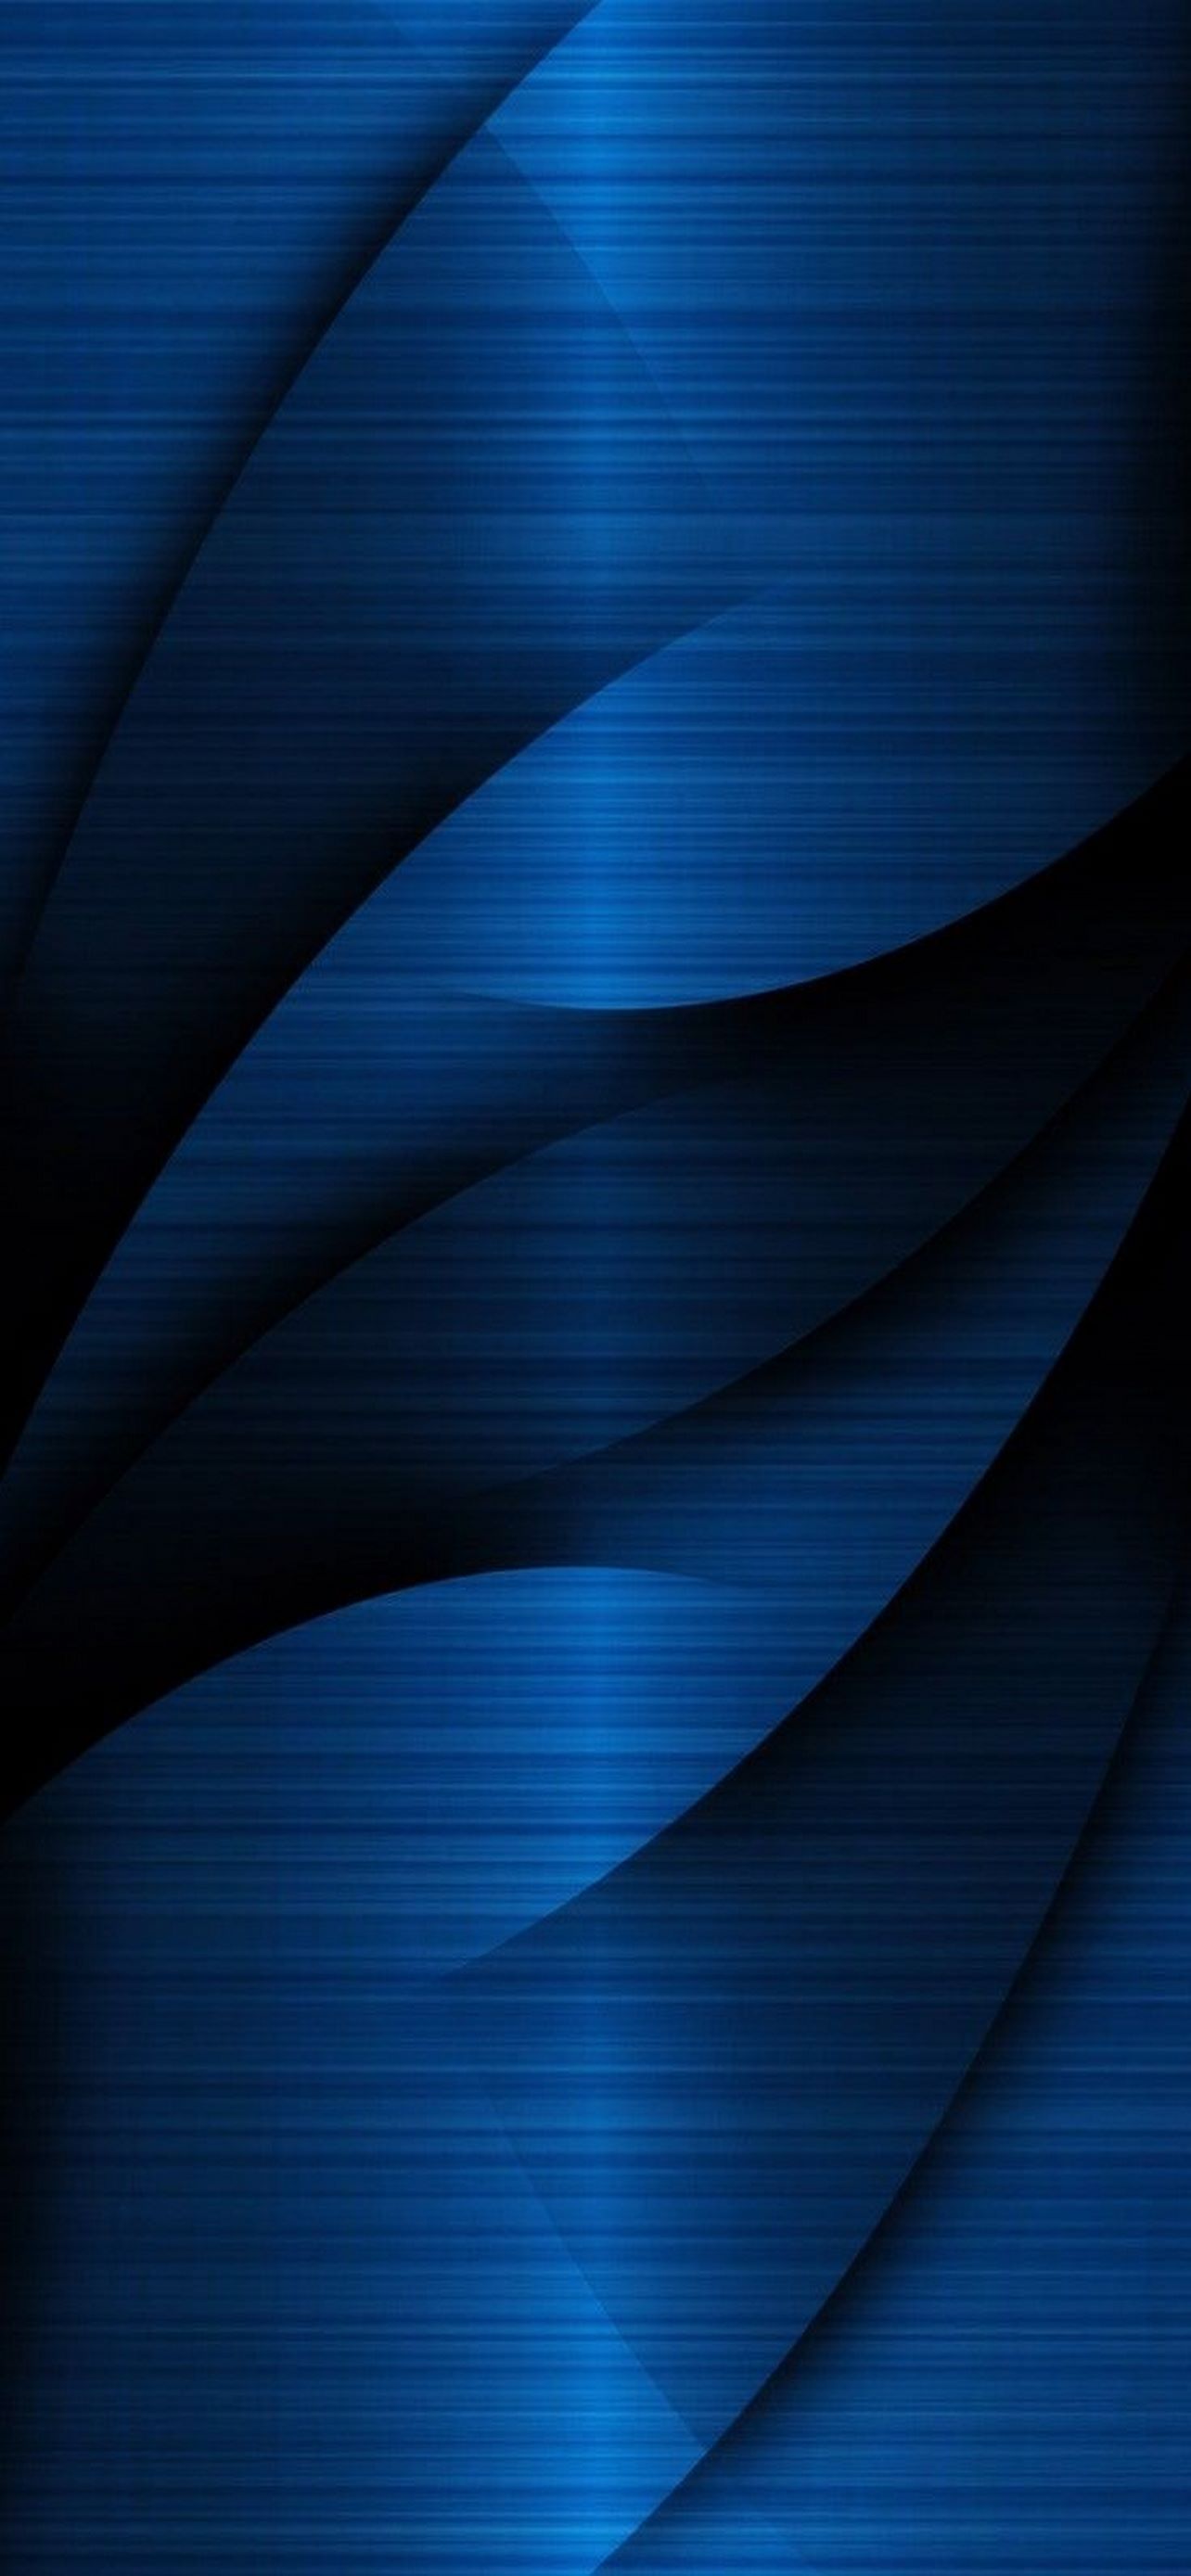 iPhone 12 Pacific Blue Wallpaper HD Download iPhone Wallpaper. Blue wallpaper, Background phone wallpaper, Blue wallpaper iphone